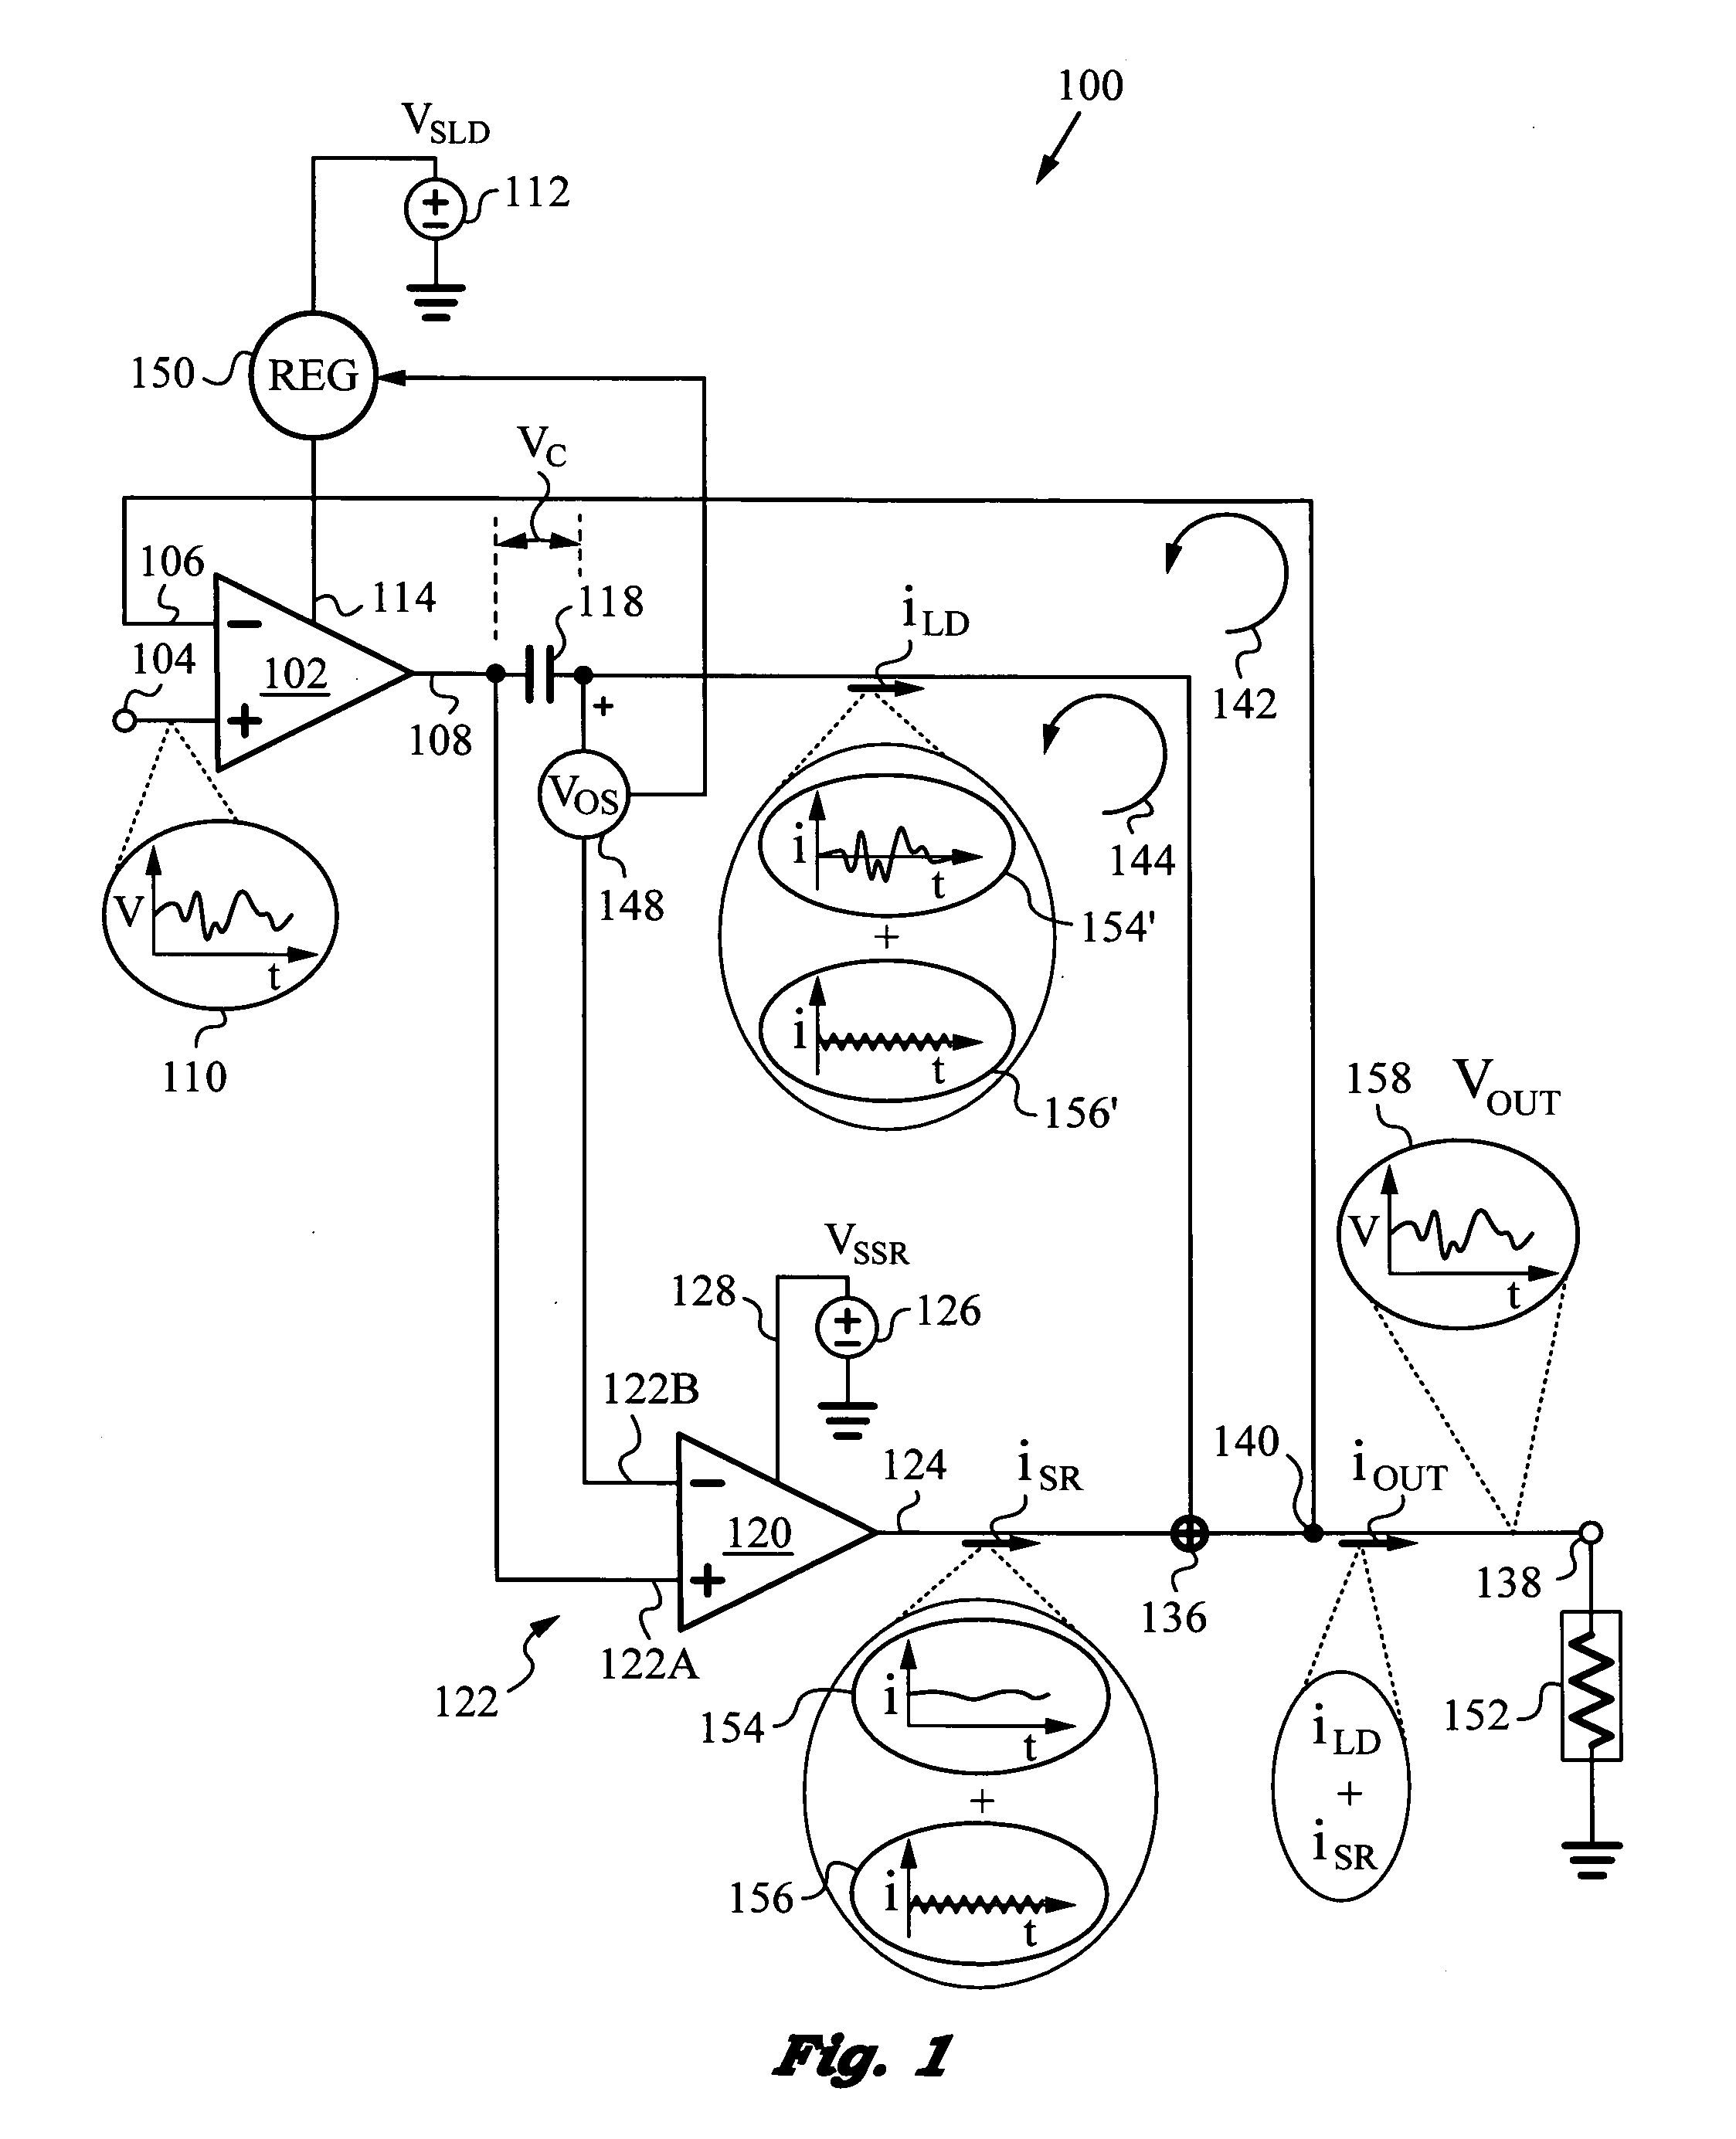 Dynamic power supply employing a linear driver and a switching regulator